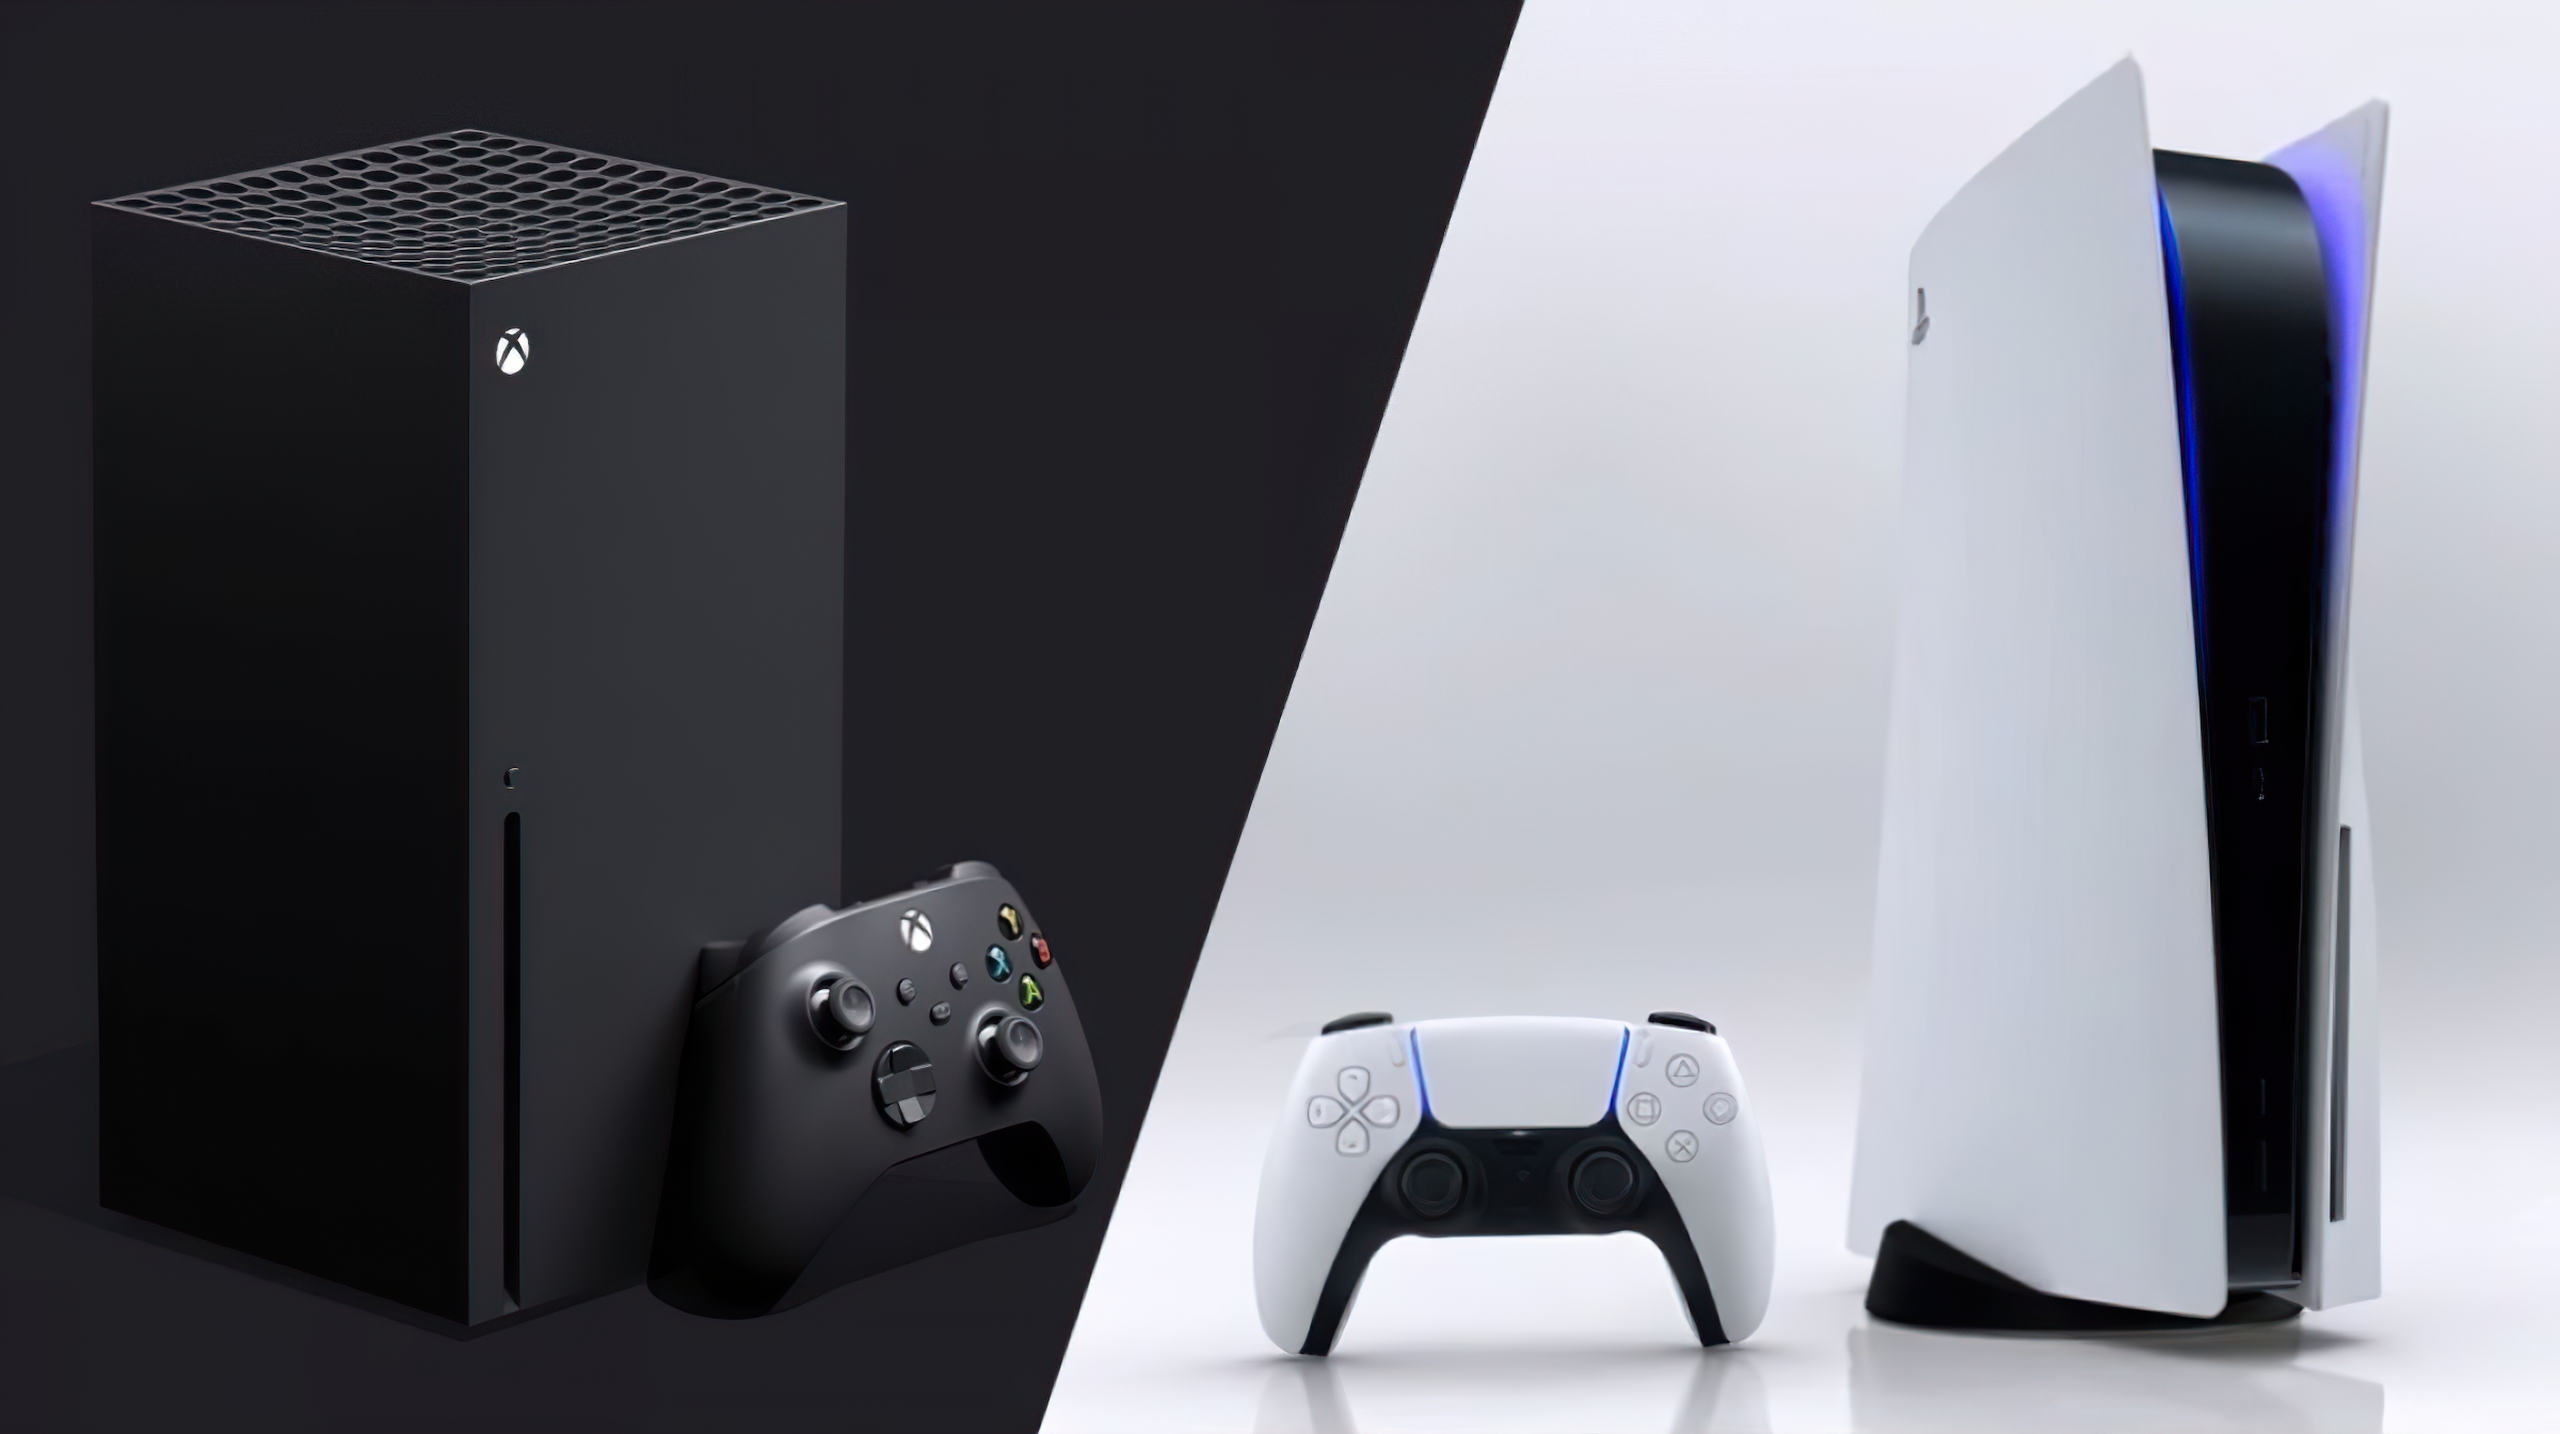 Терафлопс ps5. Ps5 Xbox. Ps5 Xbox Series x. Плейстейшен ps5. Sony PLAYSTATION ps5 Console.